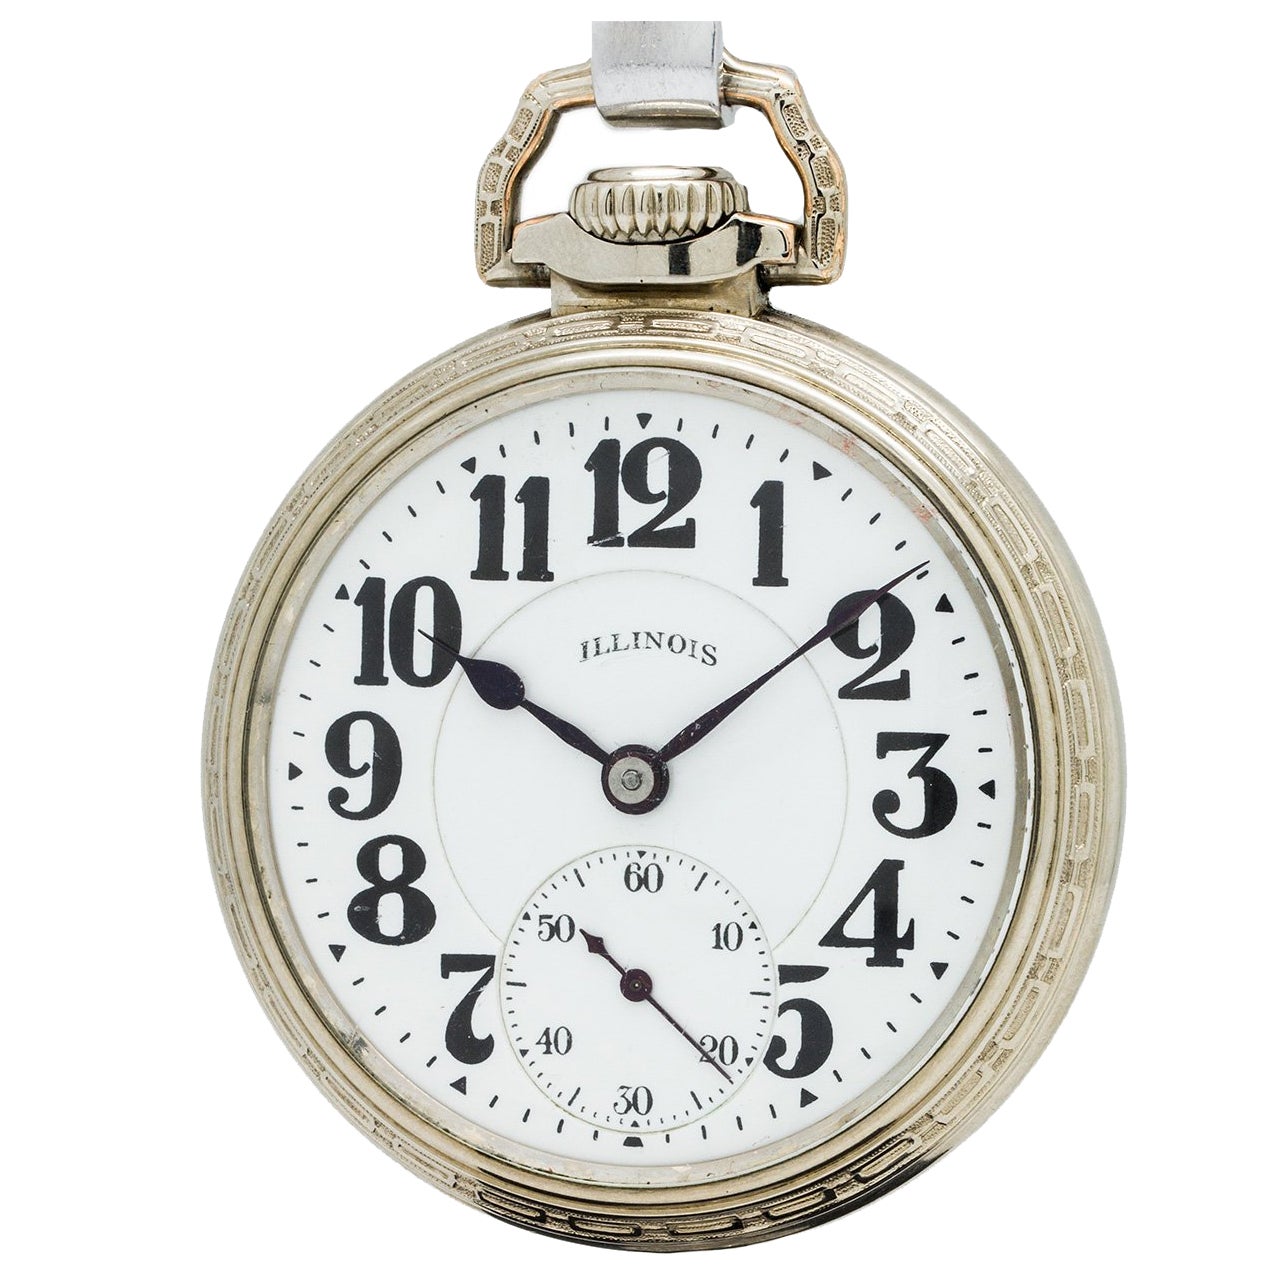 Illinois 16-S Bunn Special 60 Hour Pocket Watch, circa 1929 For 